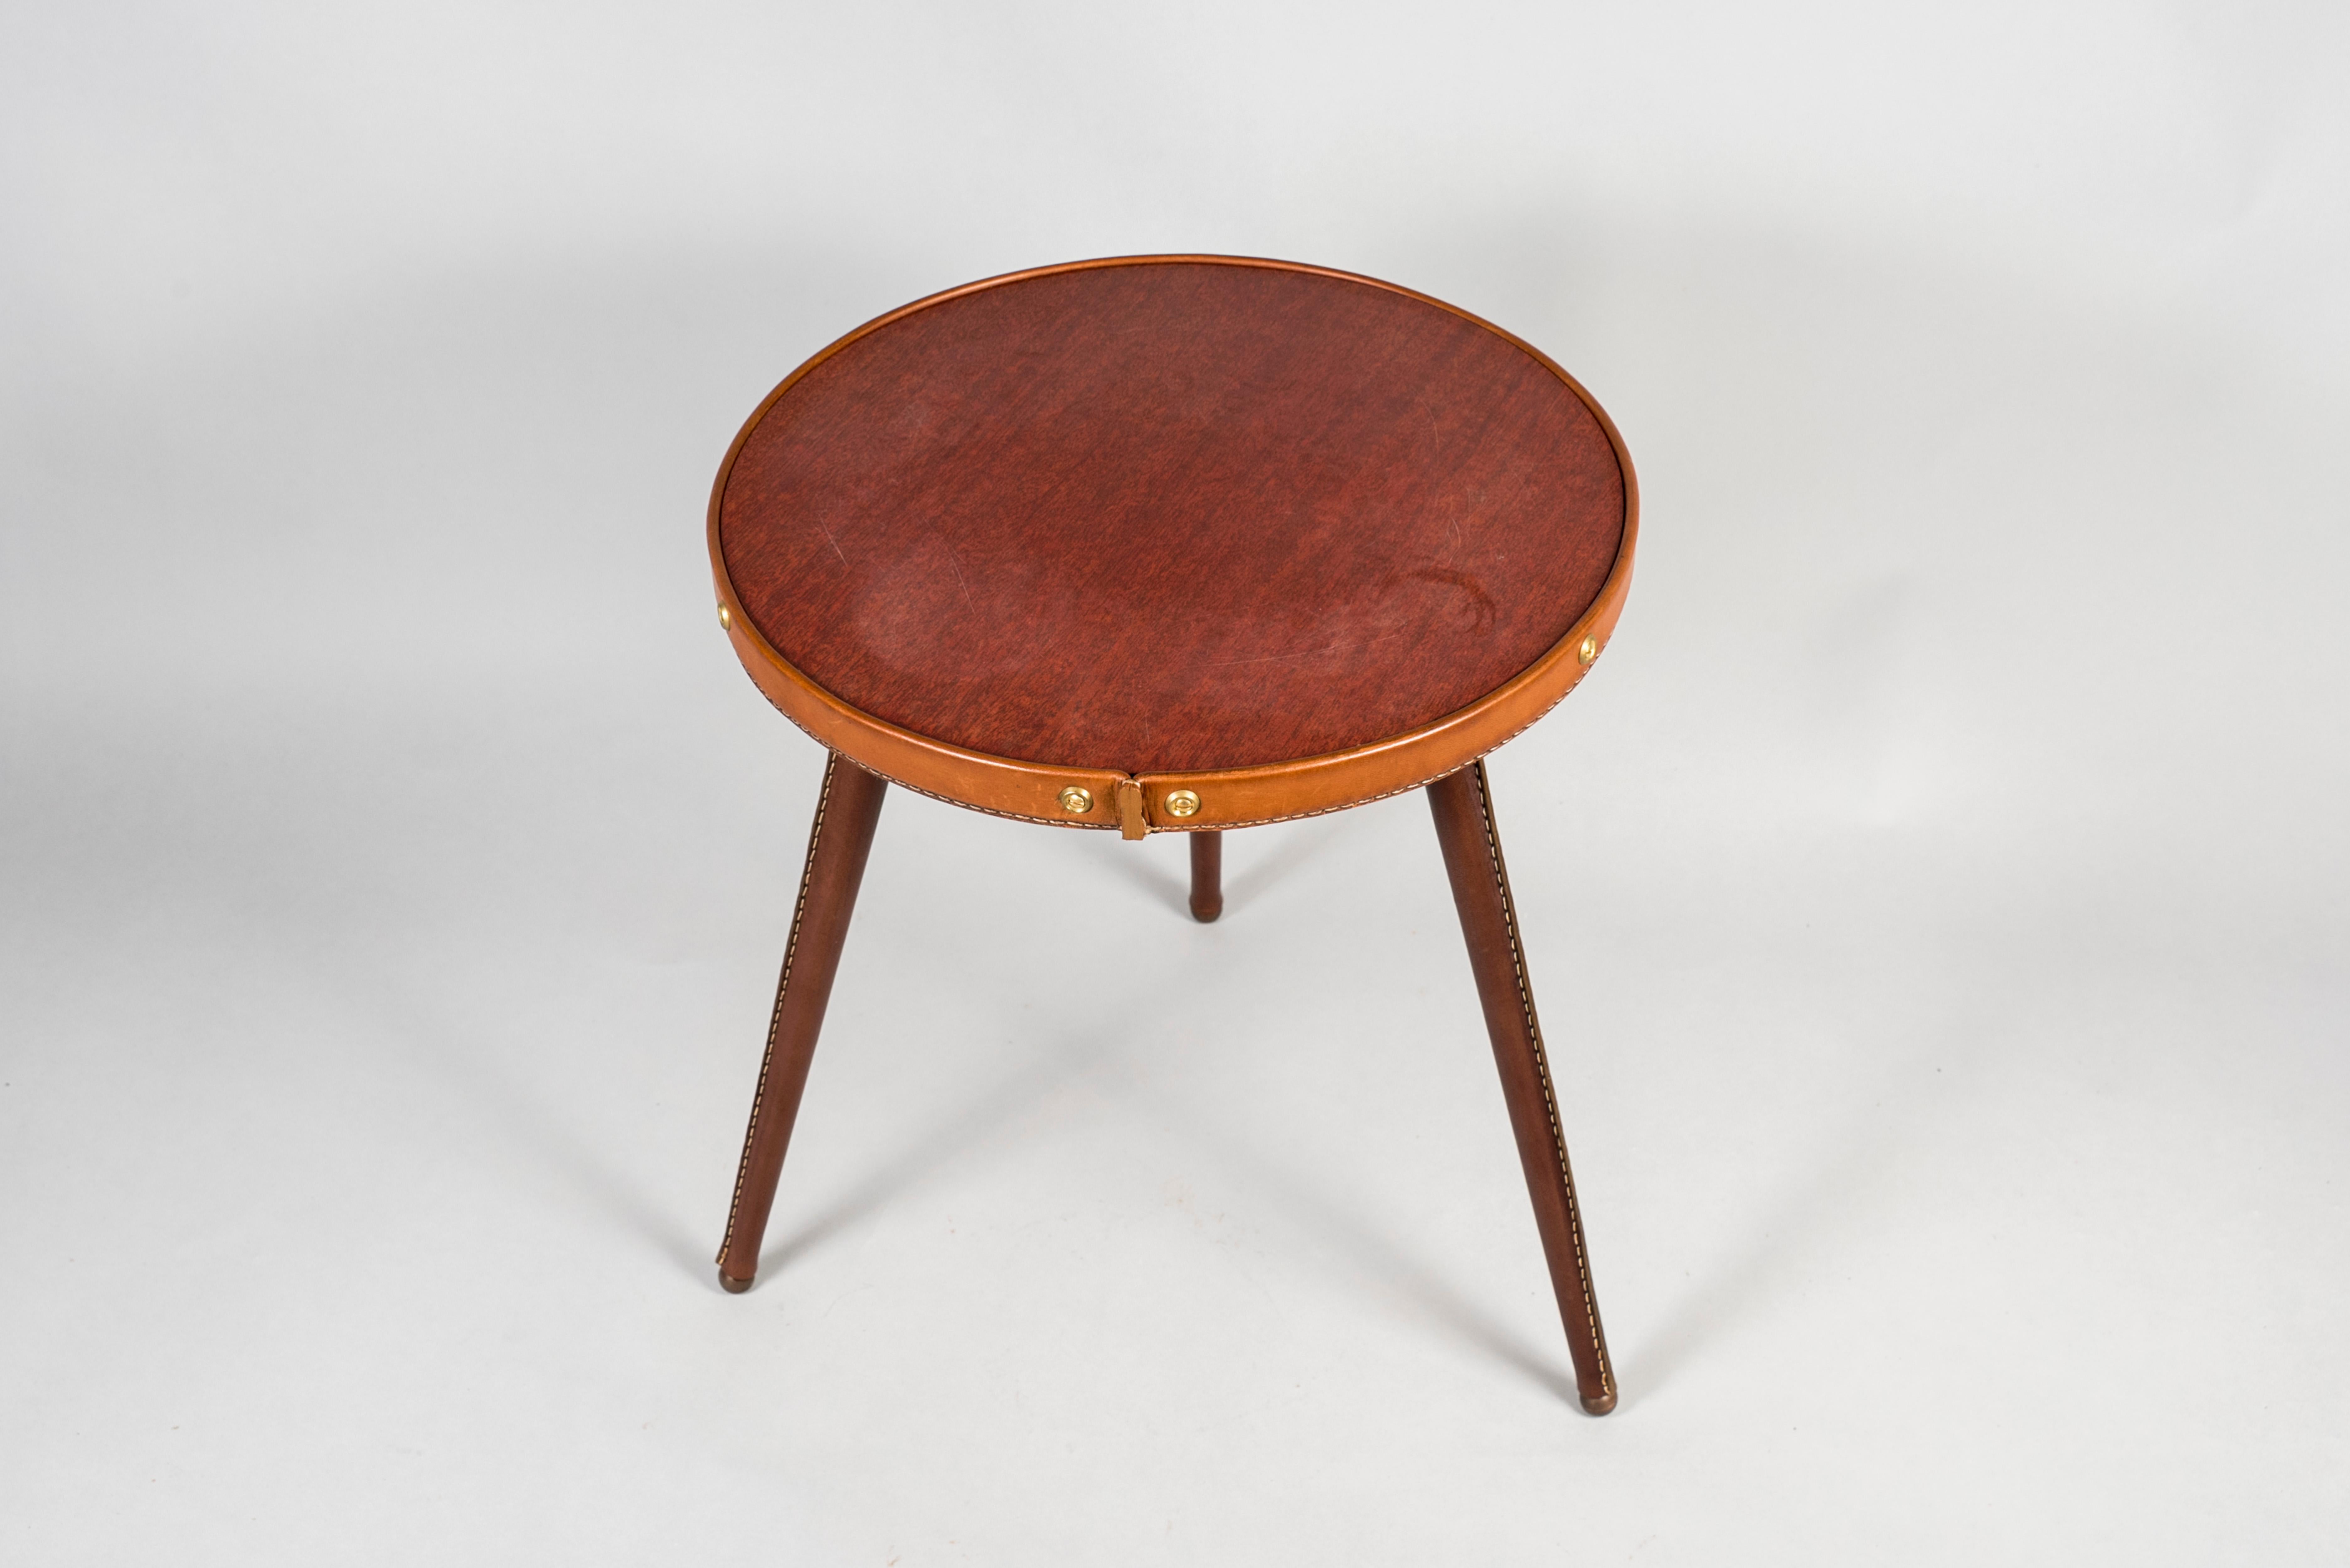 Very nice small table covered with stitched leather.
Top with brown formica.
Designed by Jacques Adnet.
France.